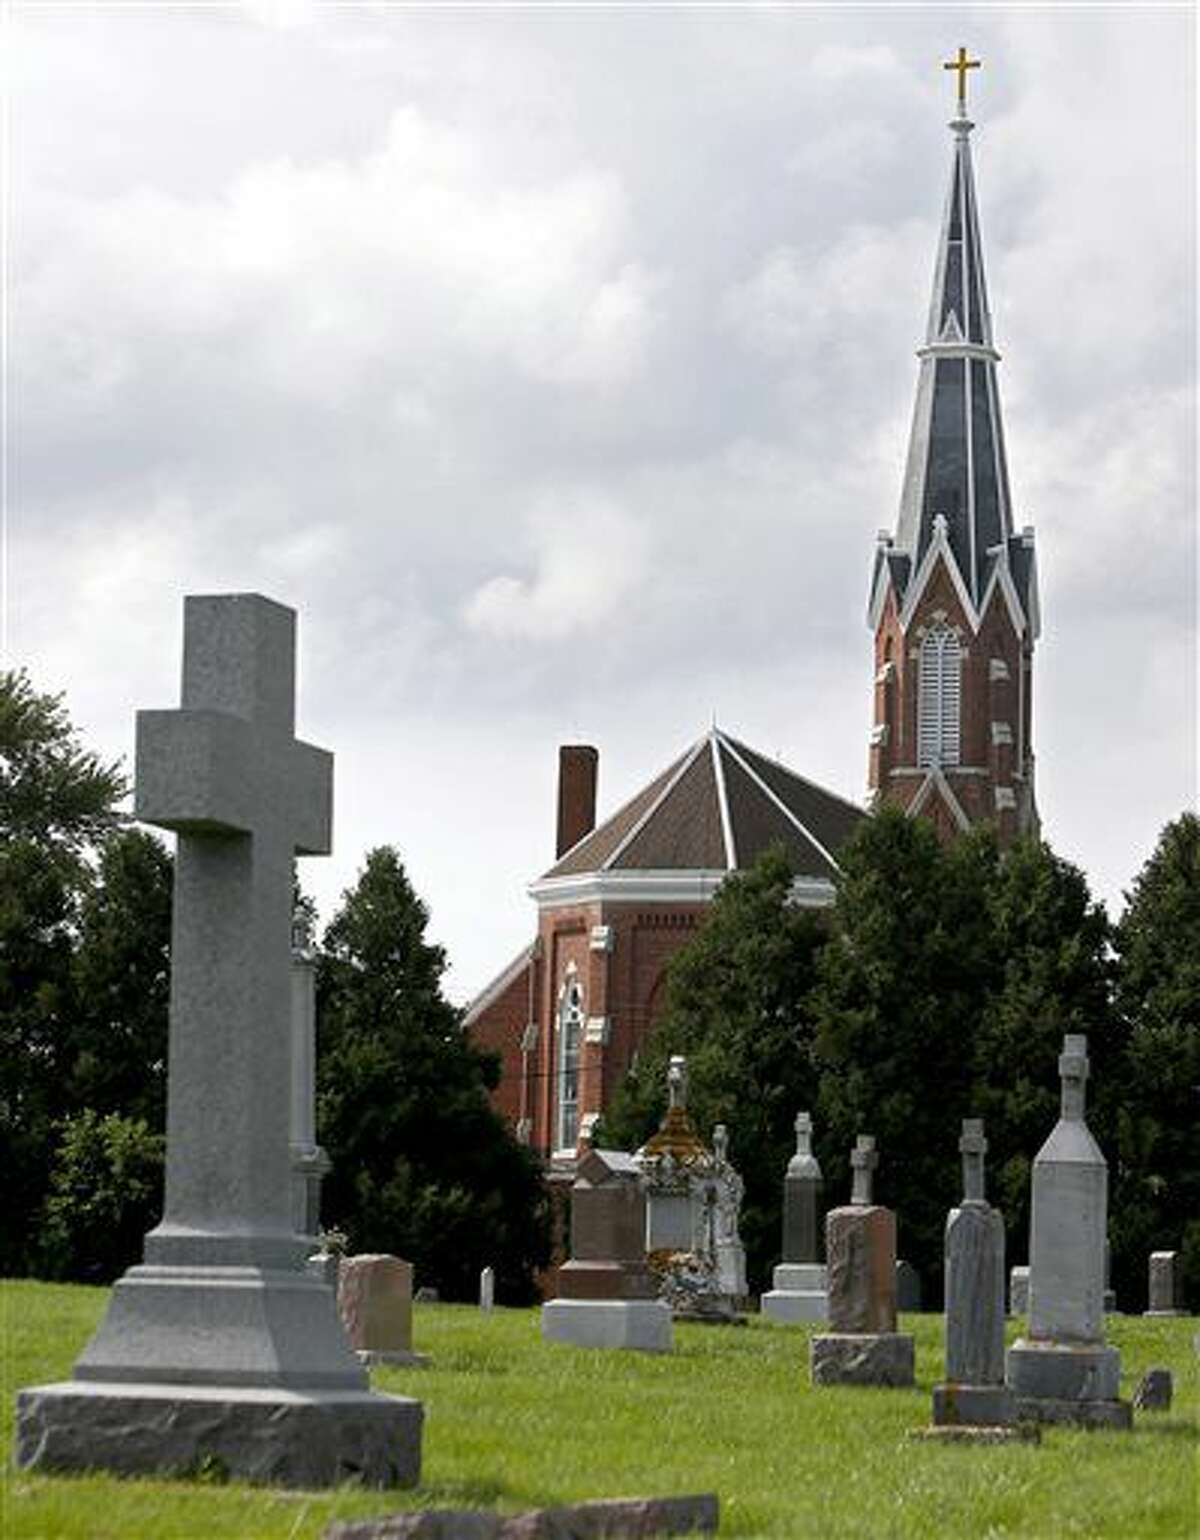 FOR RELEASE SATURDAY, AUGUST 6, 2016, AT 12:01 A.M. CDT.- In this photo from Monday, Aug. 1, 2016, St. Clements Church in Bankston, Iowa, is one of many that shares a pastor with other parishes. (Dave Kettering/Telegraph Herald via AP)